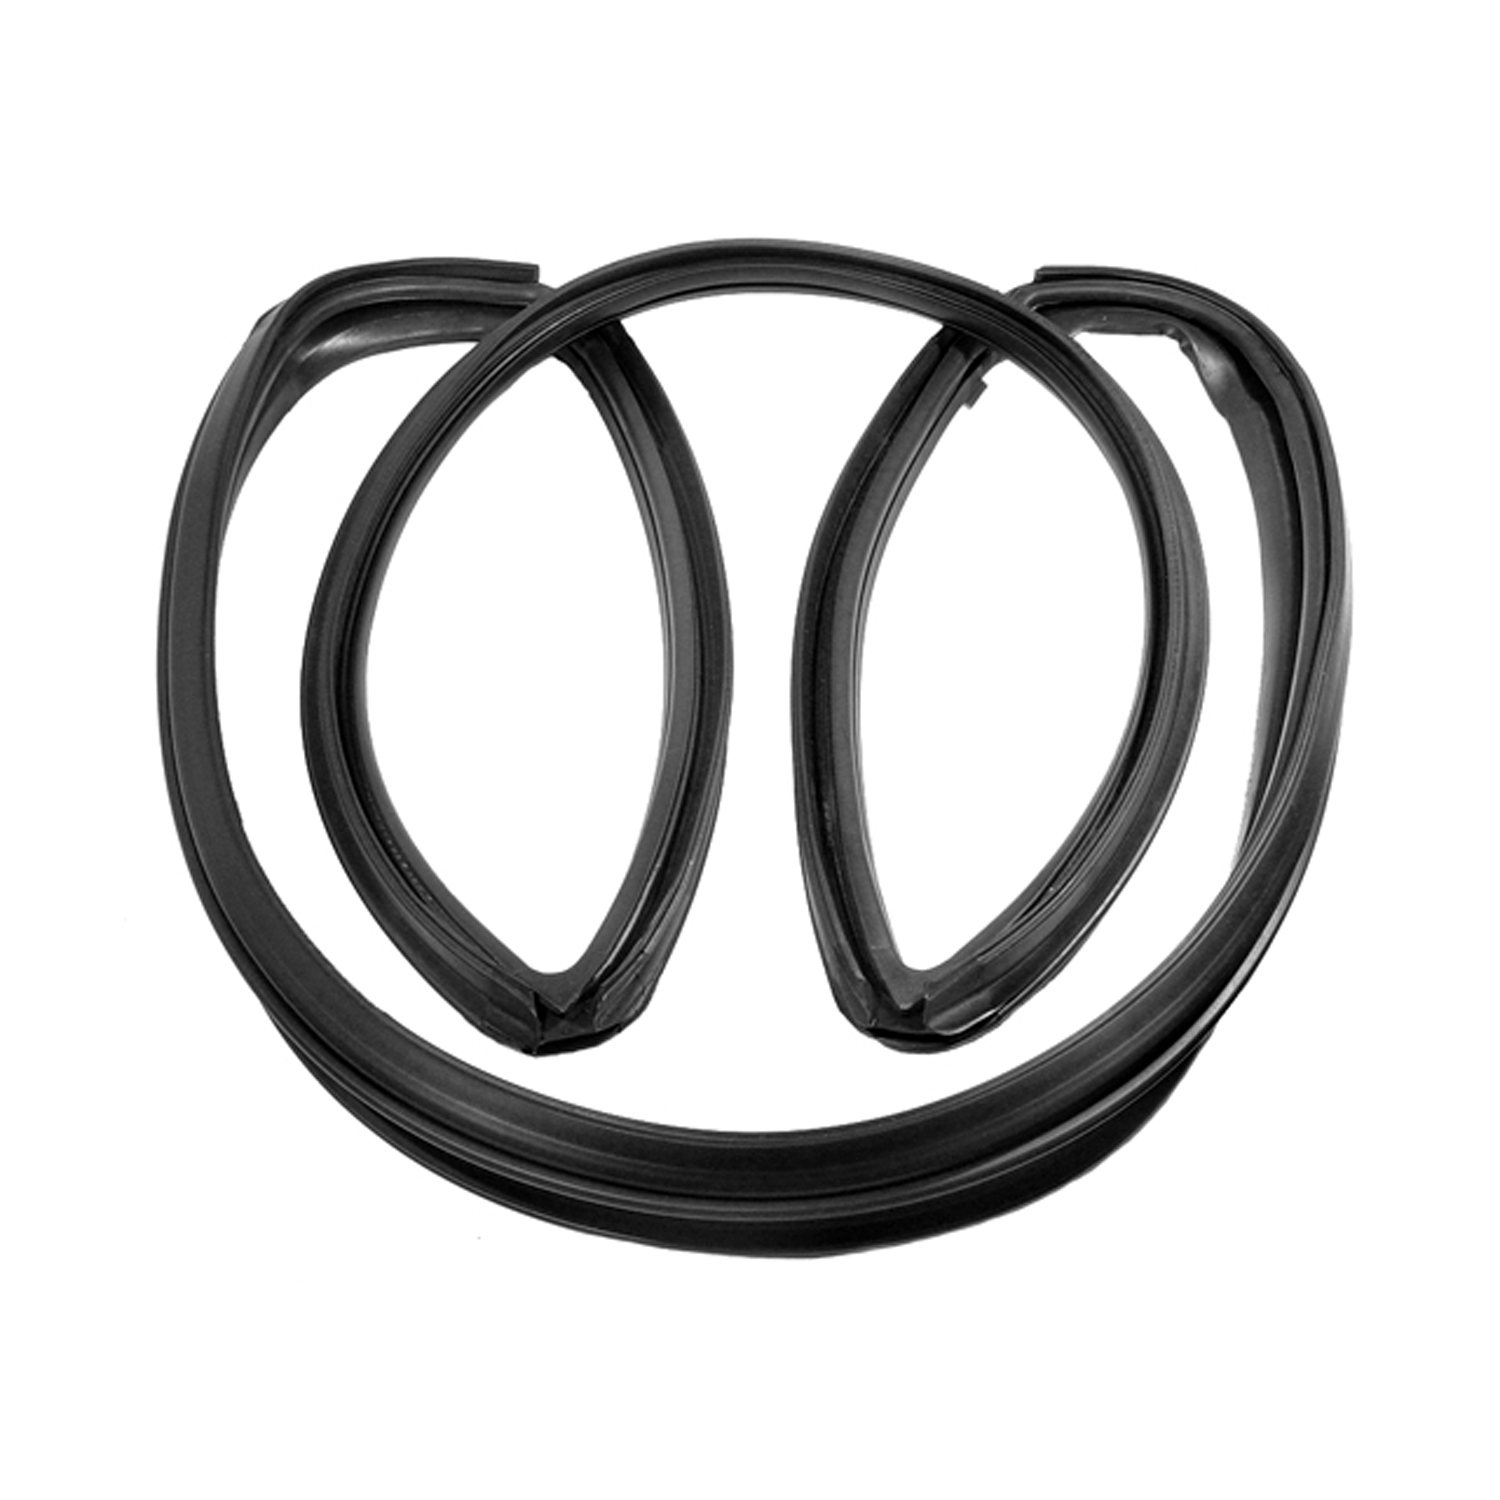 1968 Plymouth Satellite Vulcanized Windshield Seal.  Fits 2-door sedans and hardtops-VWS 2701